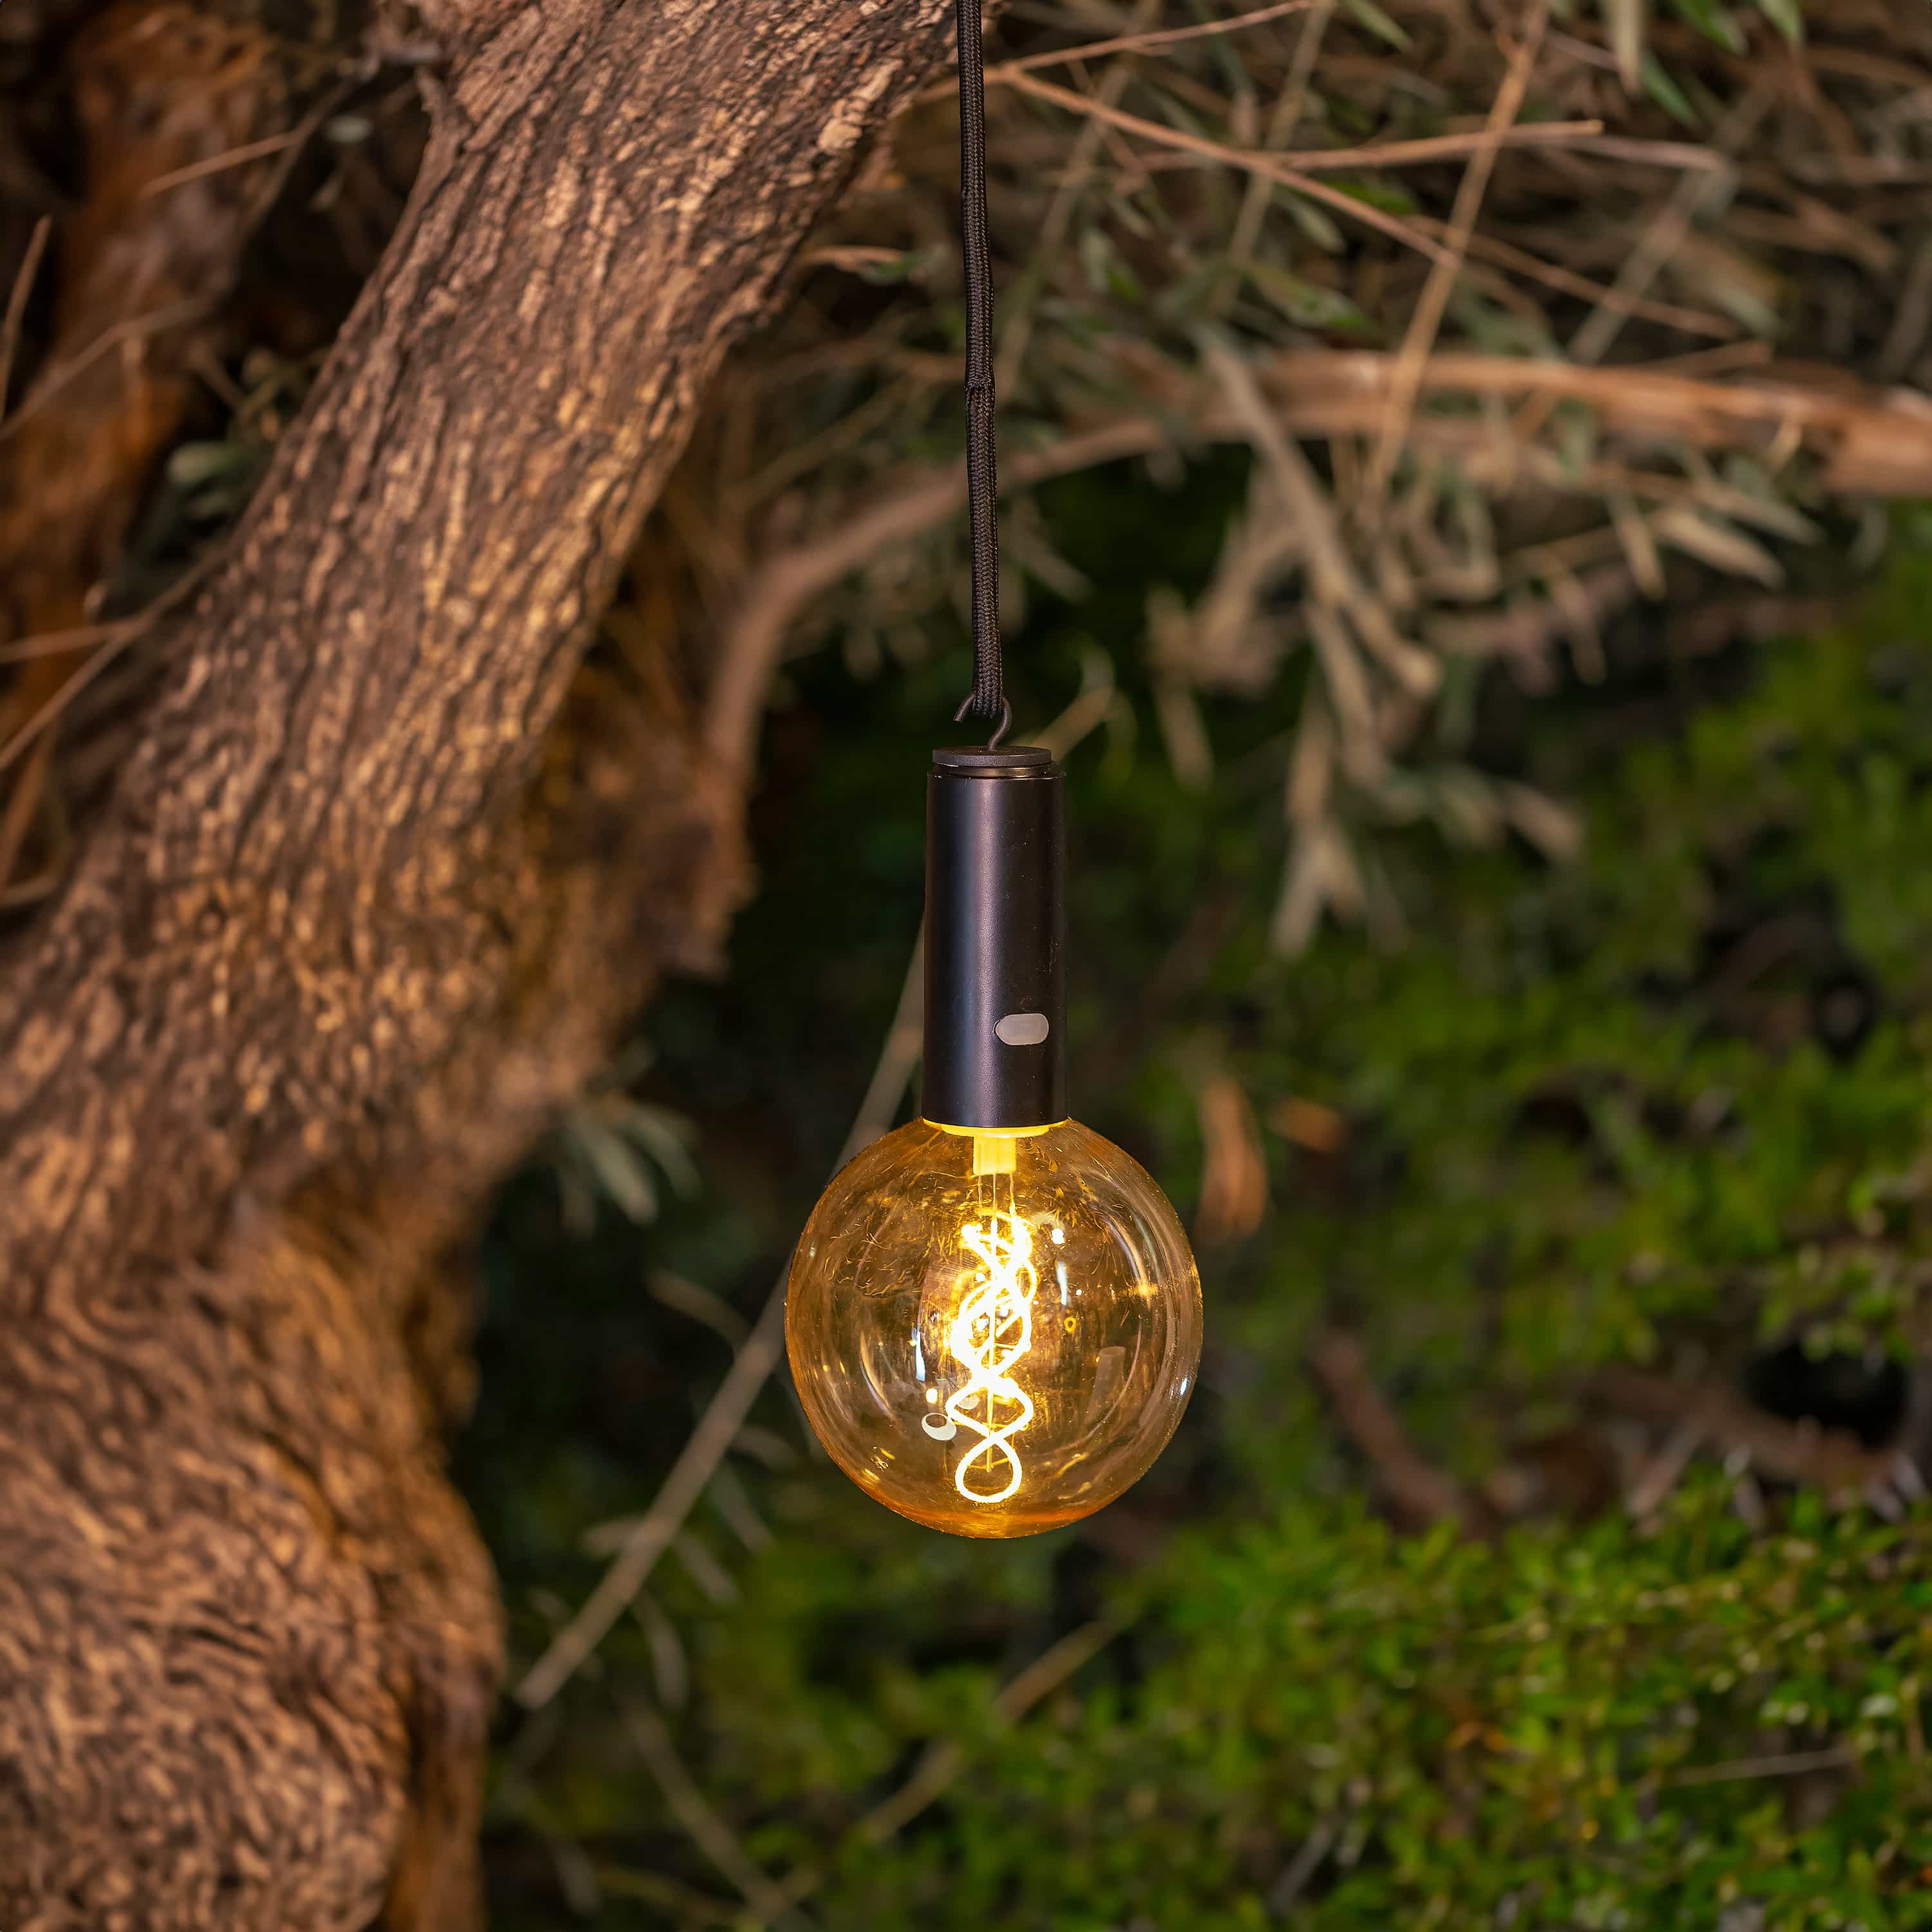 Light up any space with the Edy G125 bulb by Newgarden - a wireless, vintage-style bulb offering up to 25 hours of brightness.